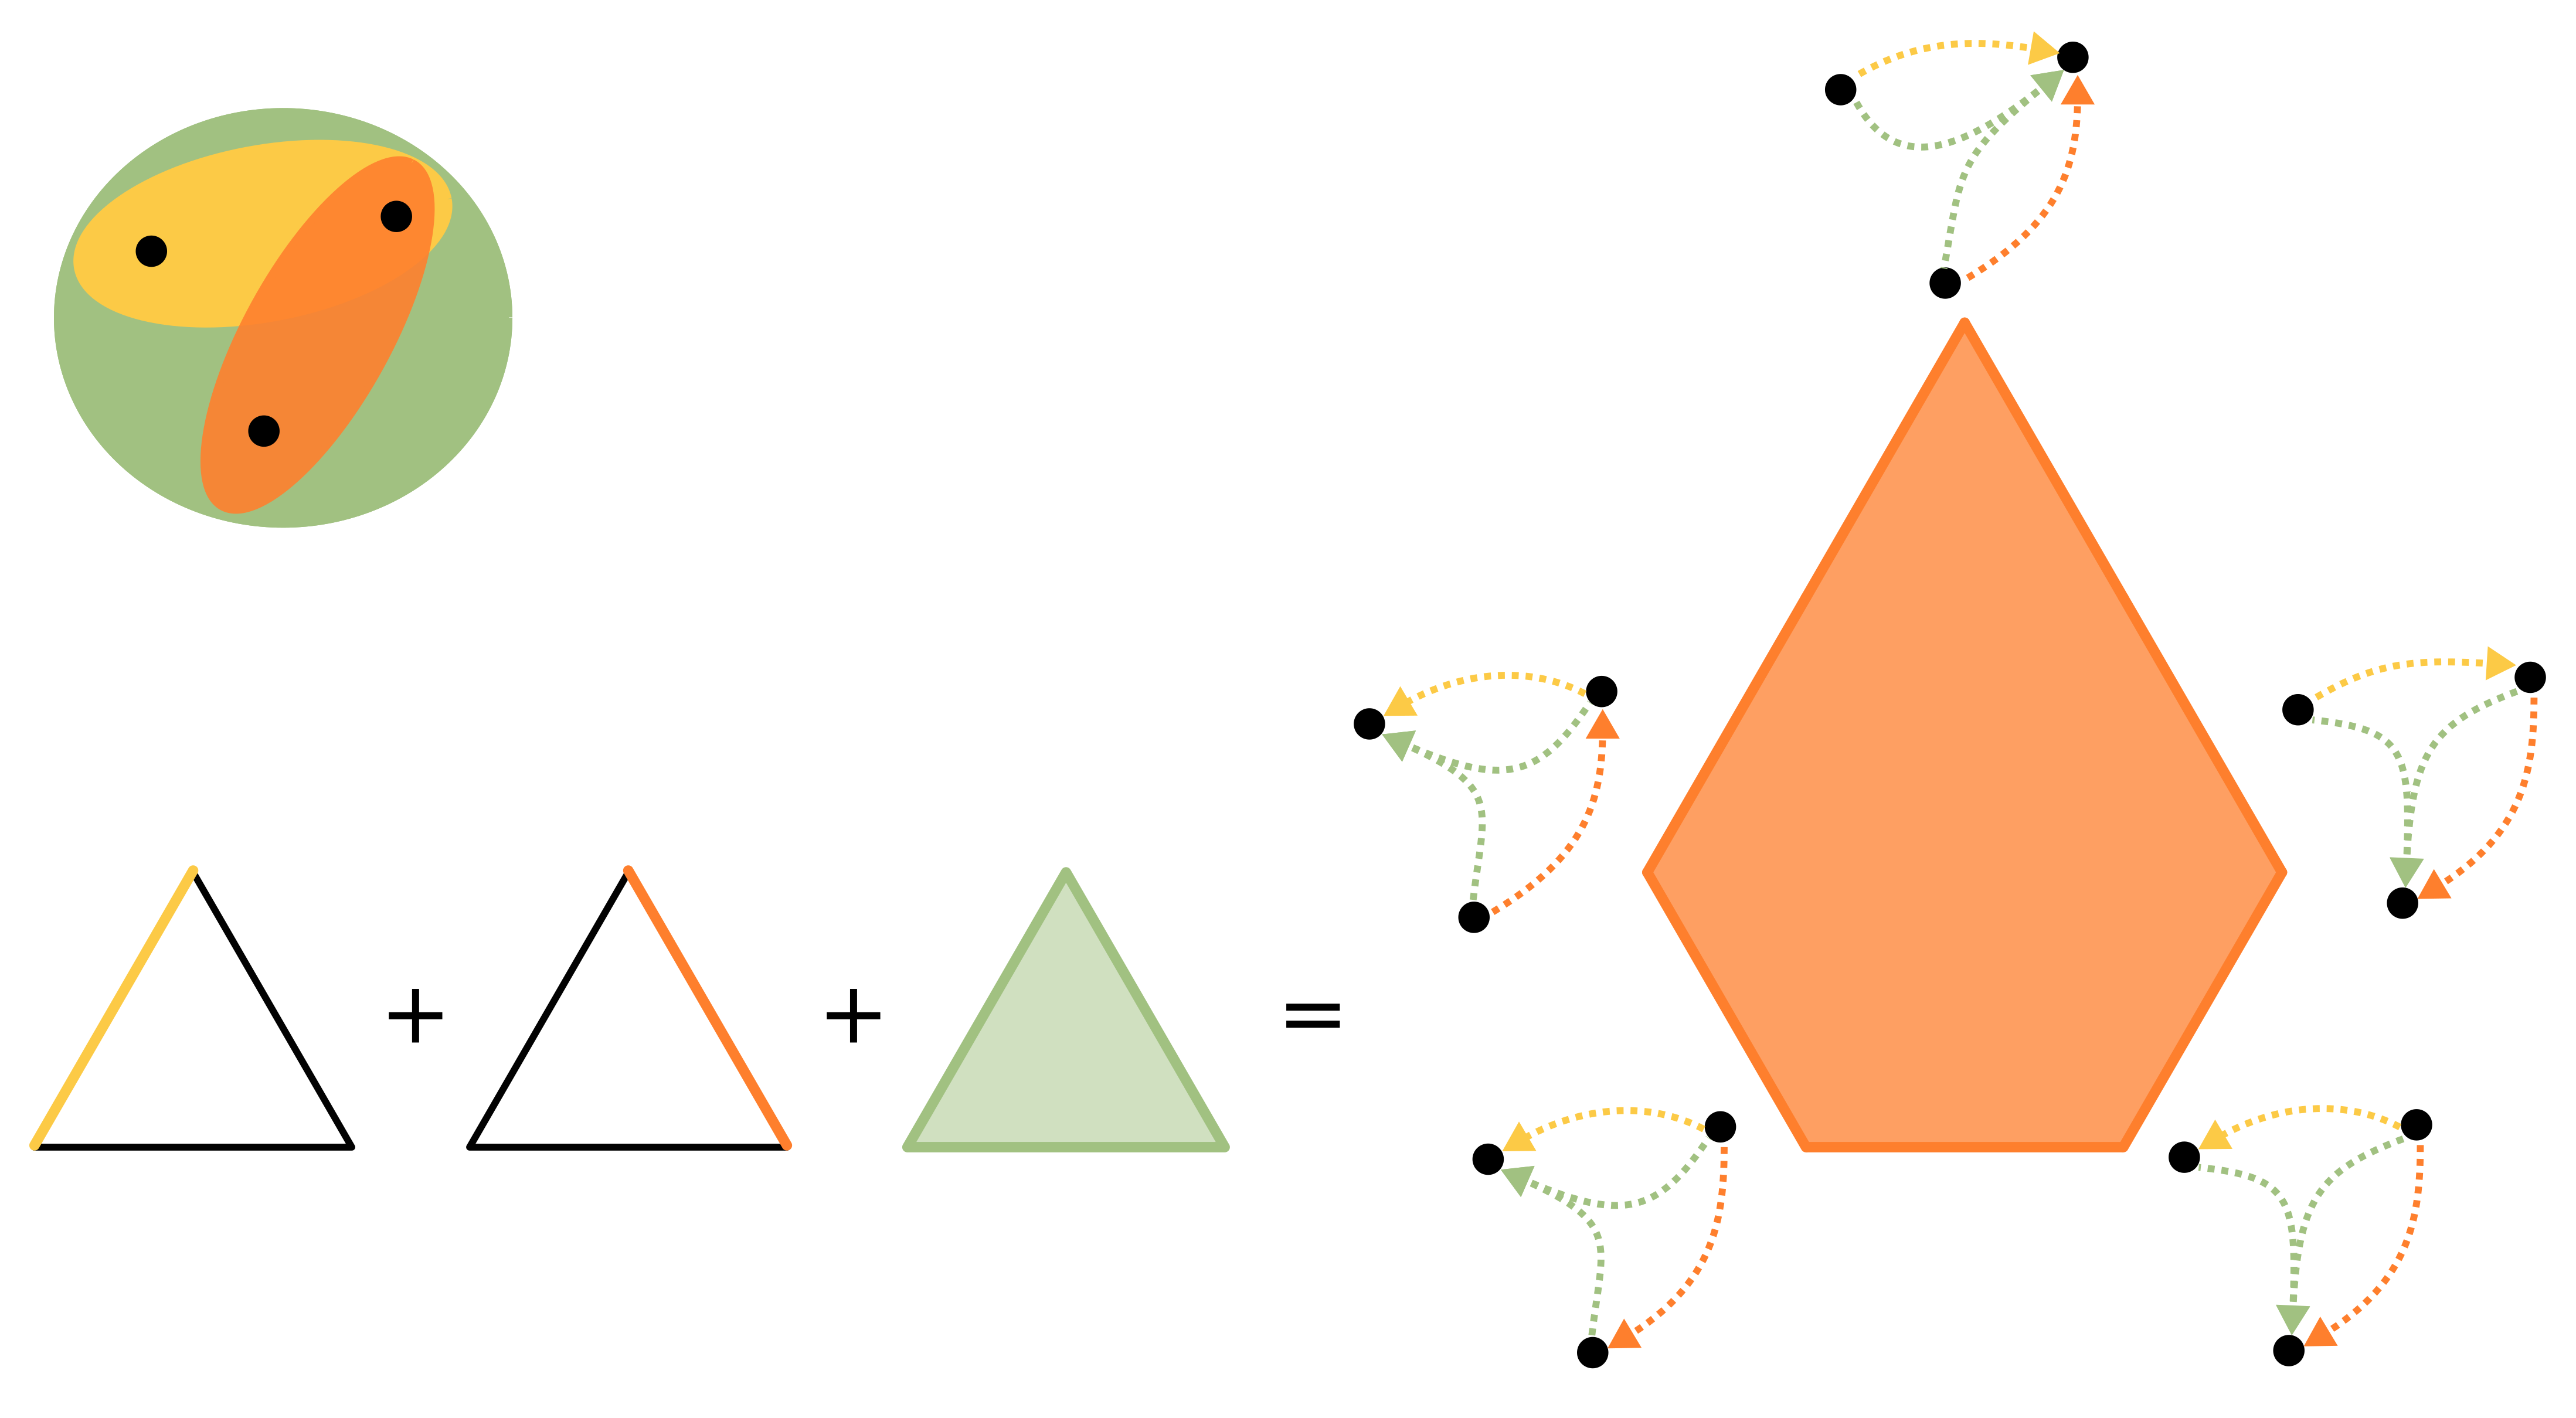 hypergraphic polytope as the Minkowski sum of simplizes and convex hull of acyclic orientations